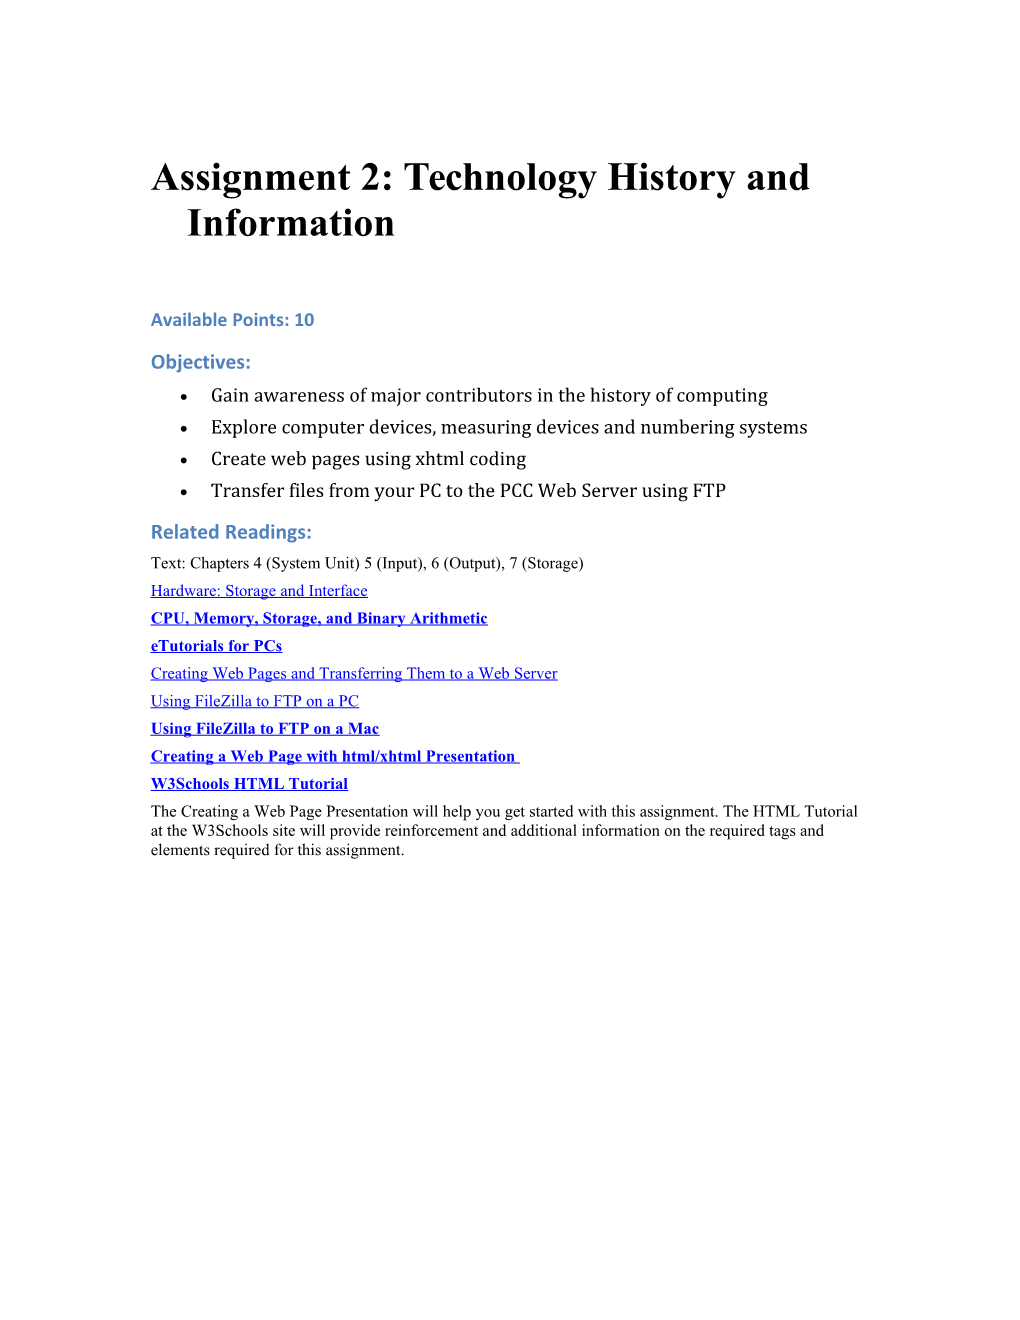 Assignment 2: Technology History and Information